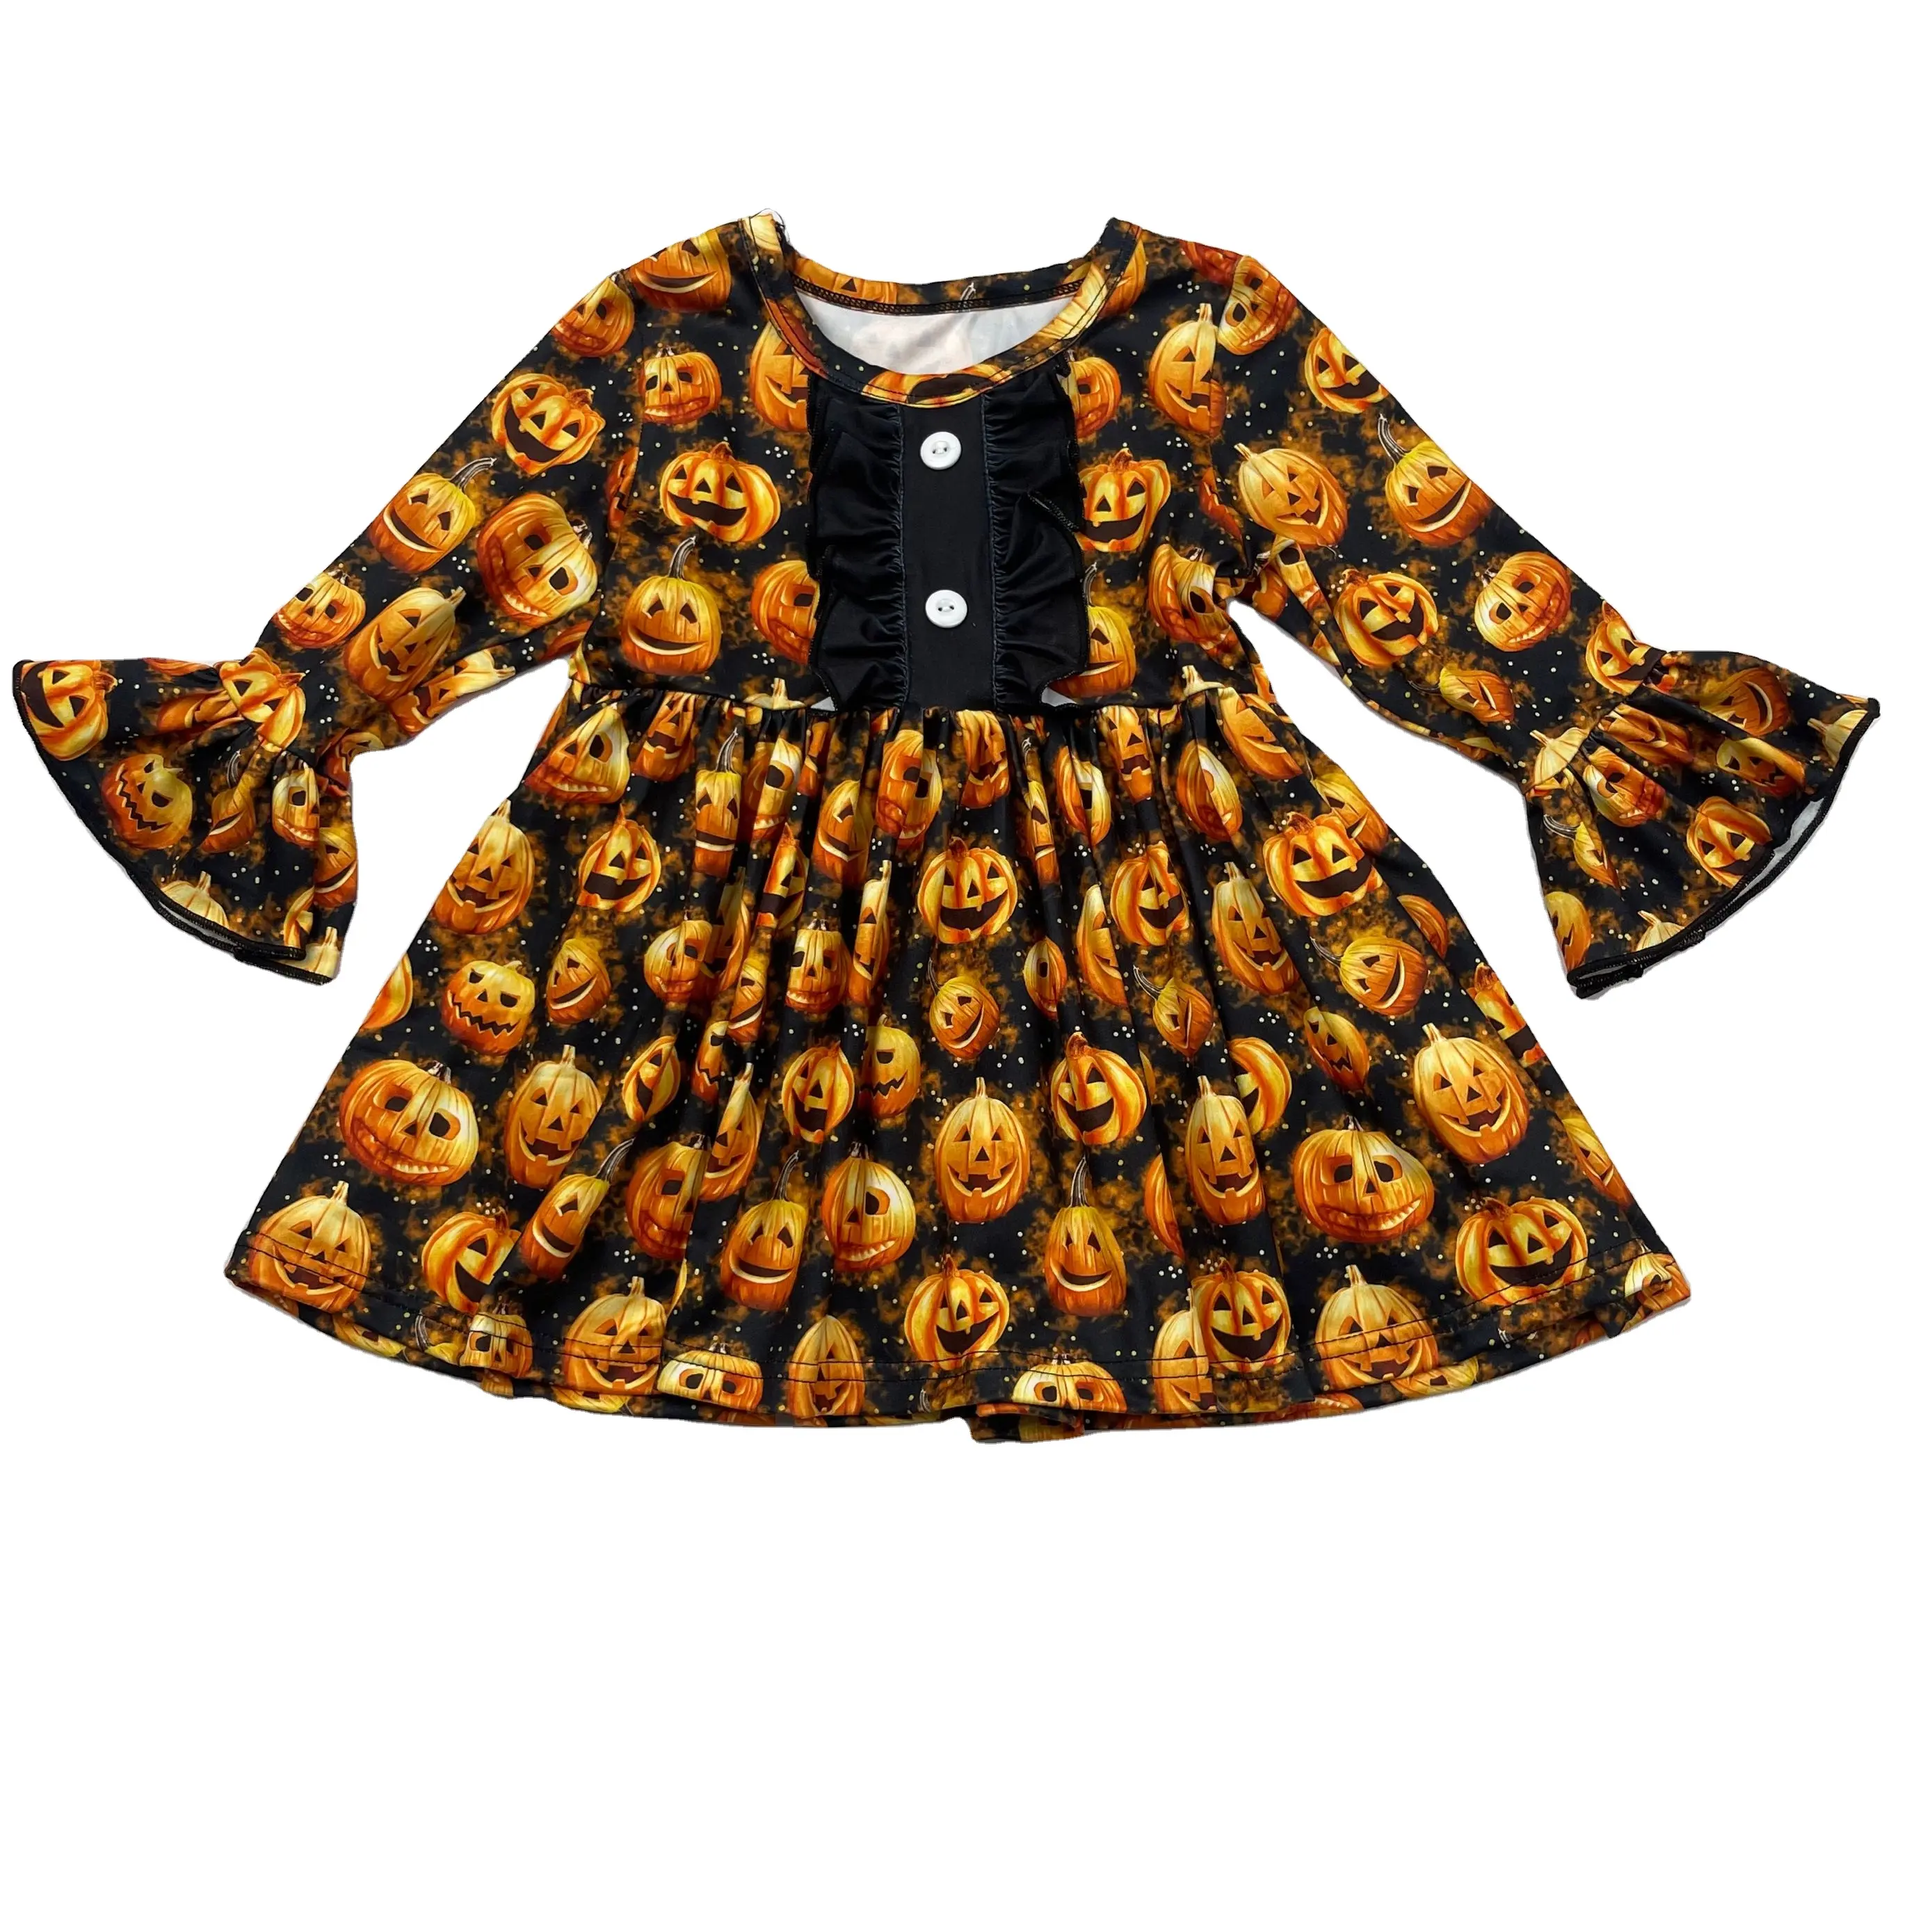 New Arrival Baby Girls Frock Dresses Kids Clothing toddler Boutique girls Clothes Halloween Pumpkin Party Dress